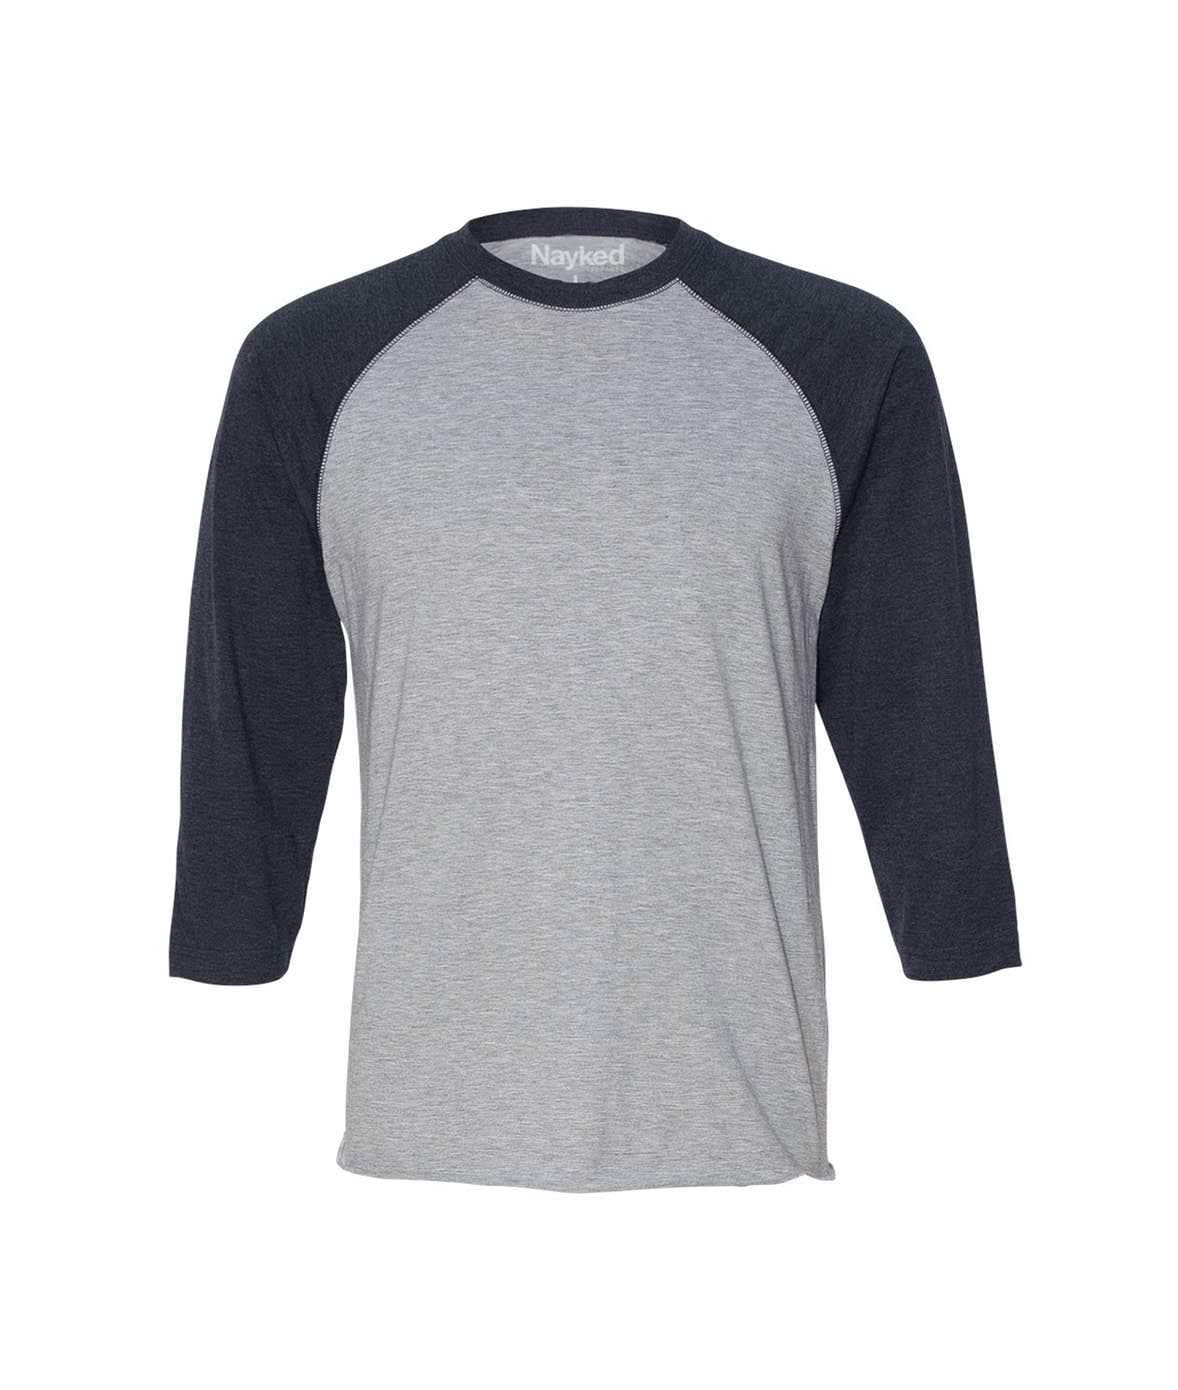 Nayked Apparel - Men's Ridiculously Soft Midweight Baseball Tee ...